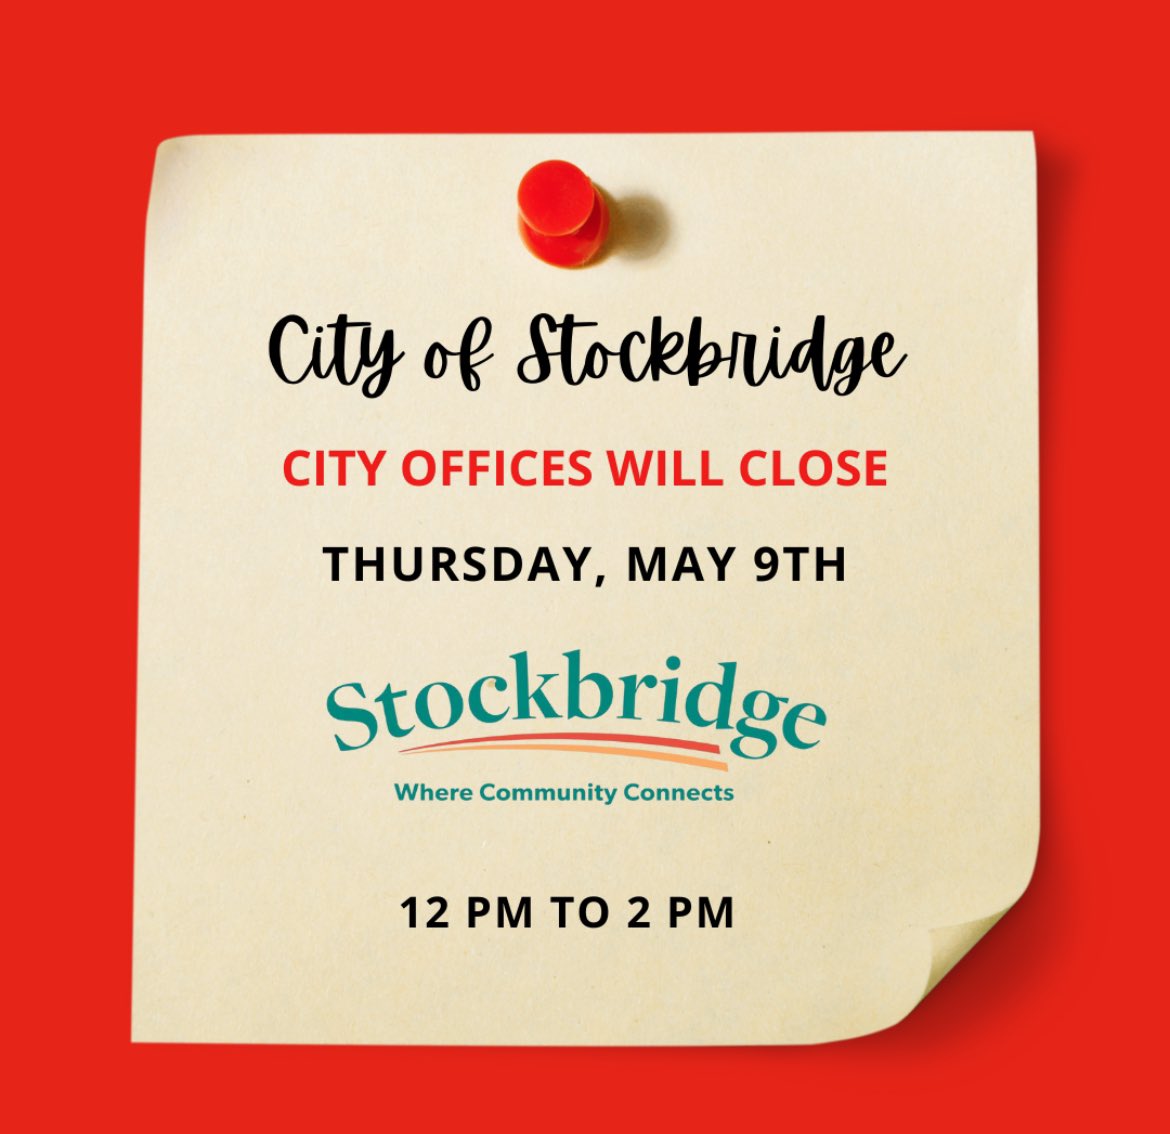 ATTENTION COMMUNITY MEMBERS! City of Stockbridge Offices will be closed on this Thursday, May 9th from 12 pm to 2 pm. Staff will be available starting back at 2 pm. We appreciate your patience and understanding. #CityofStockbridge #Stockbridge #community #yourcity #StockbridgeGA